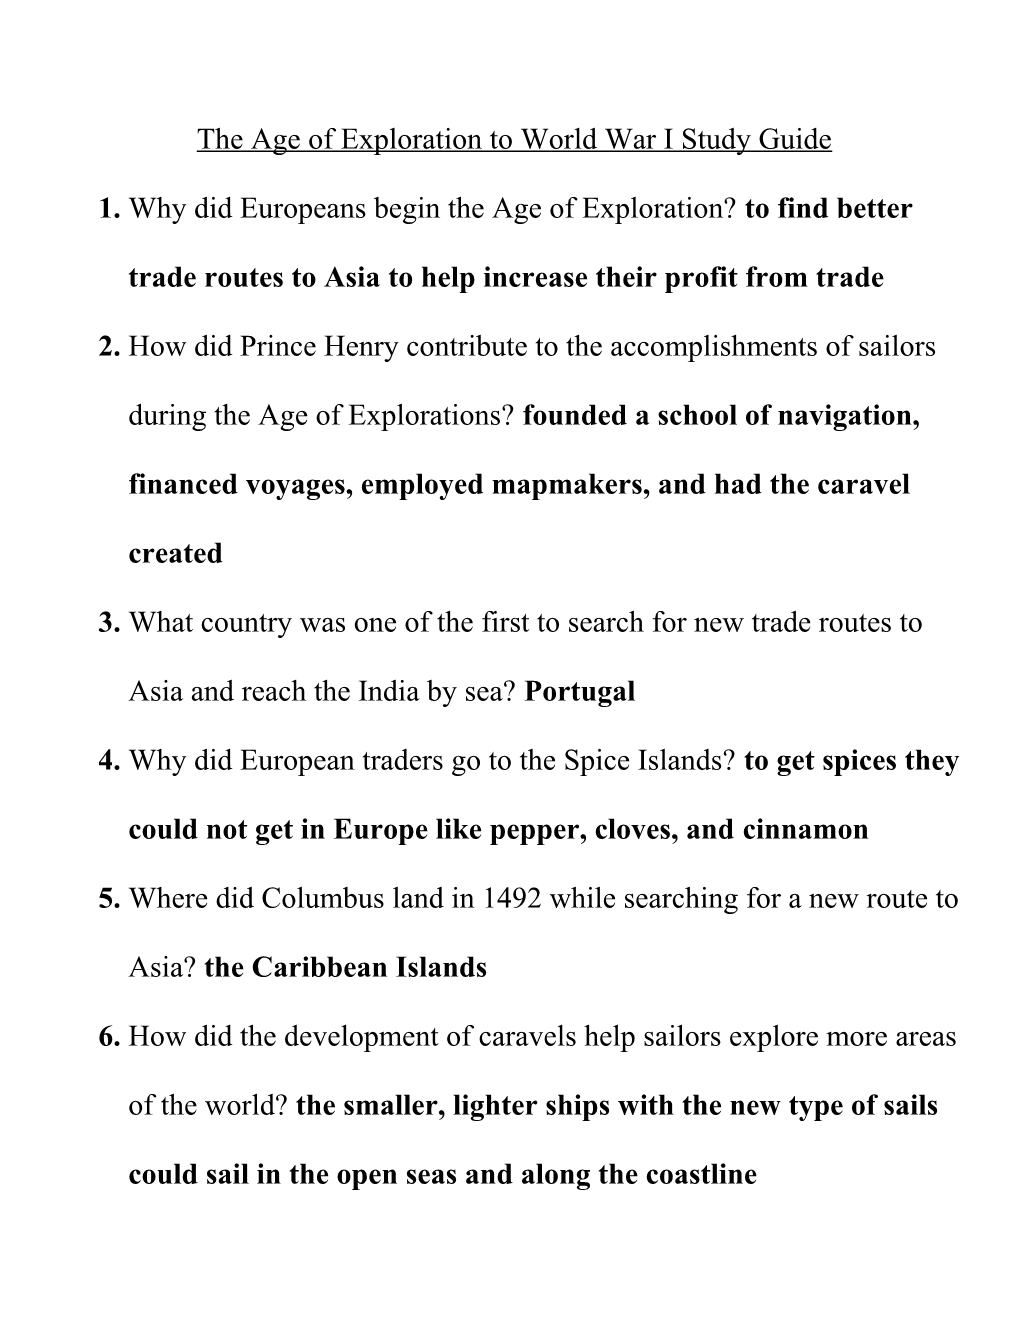 The Age of Exploration to World War II Study Guide